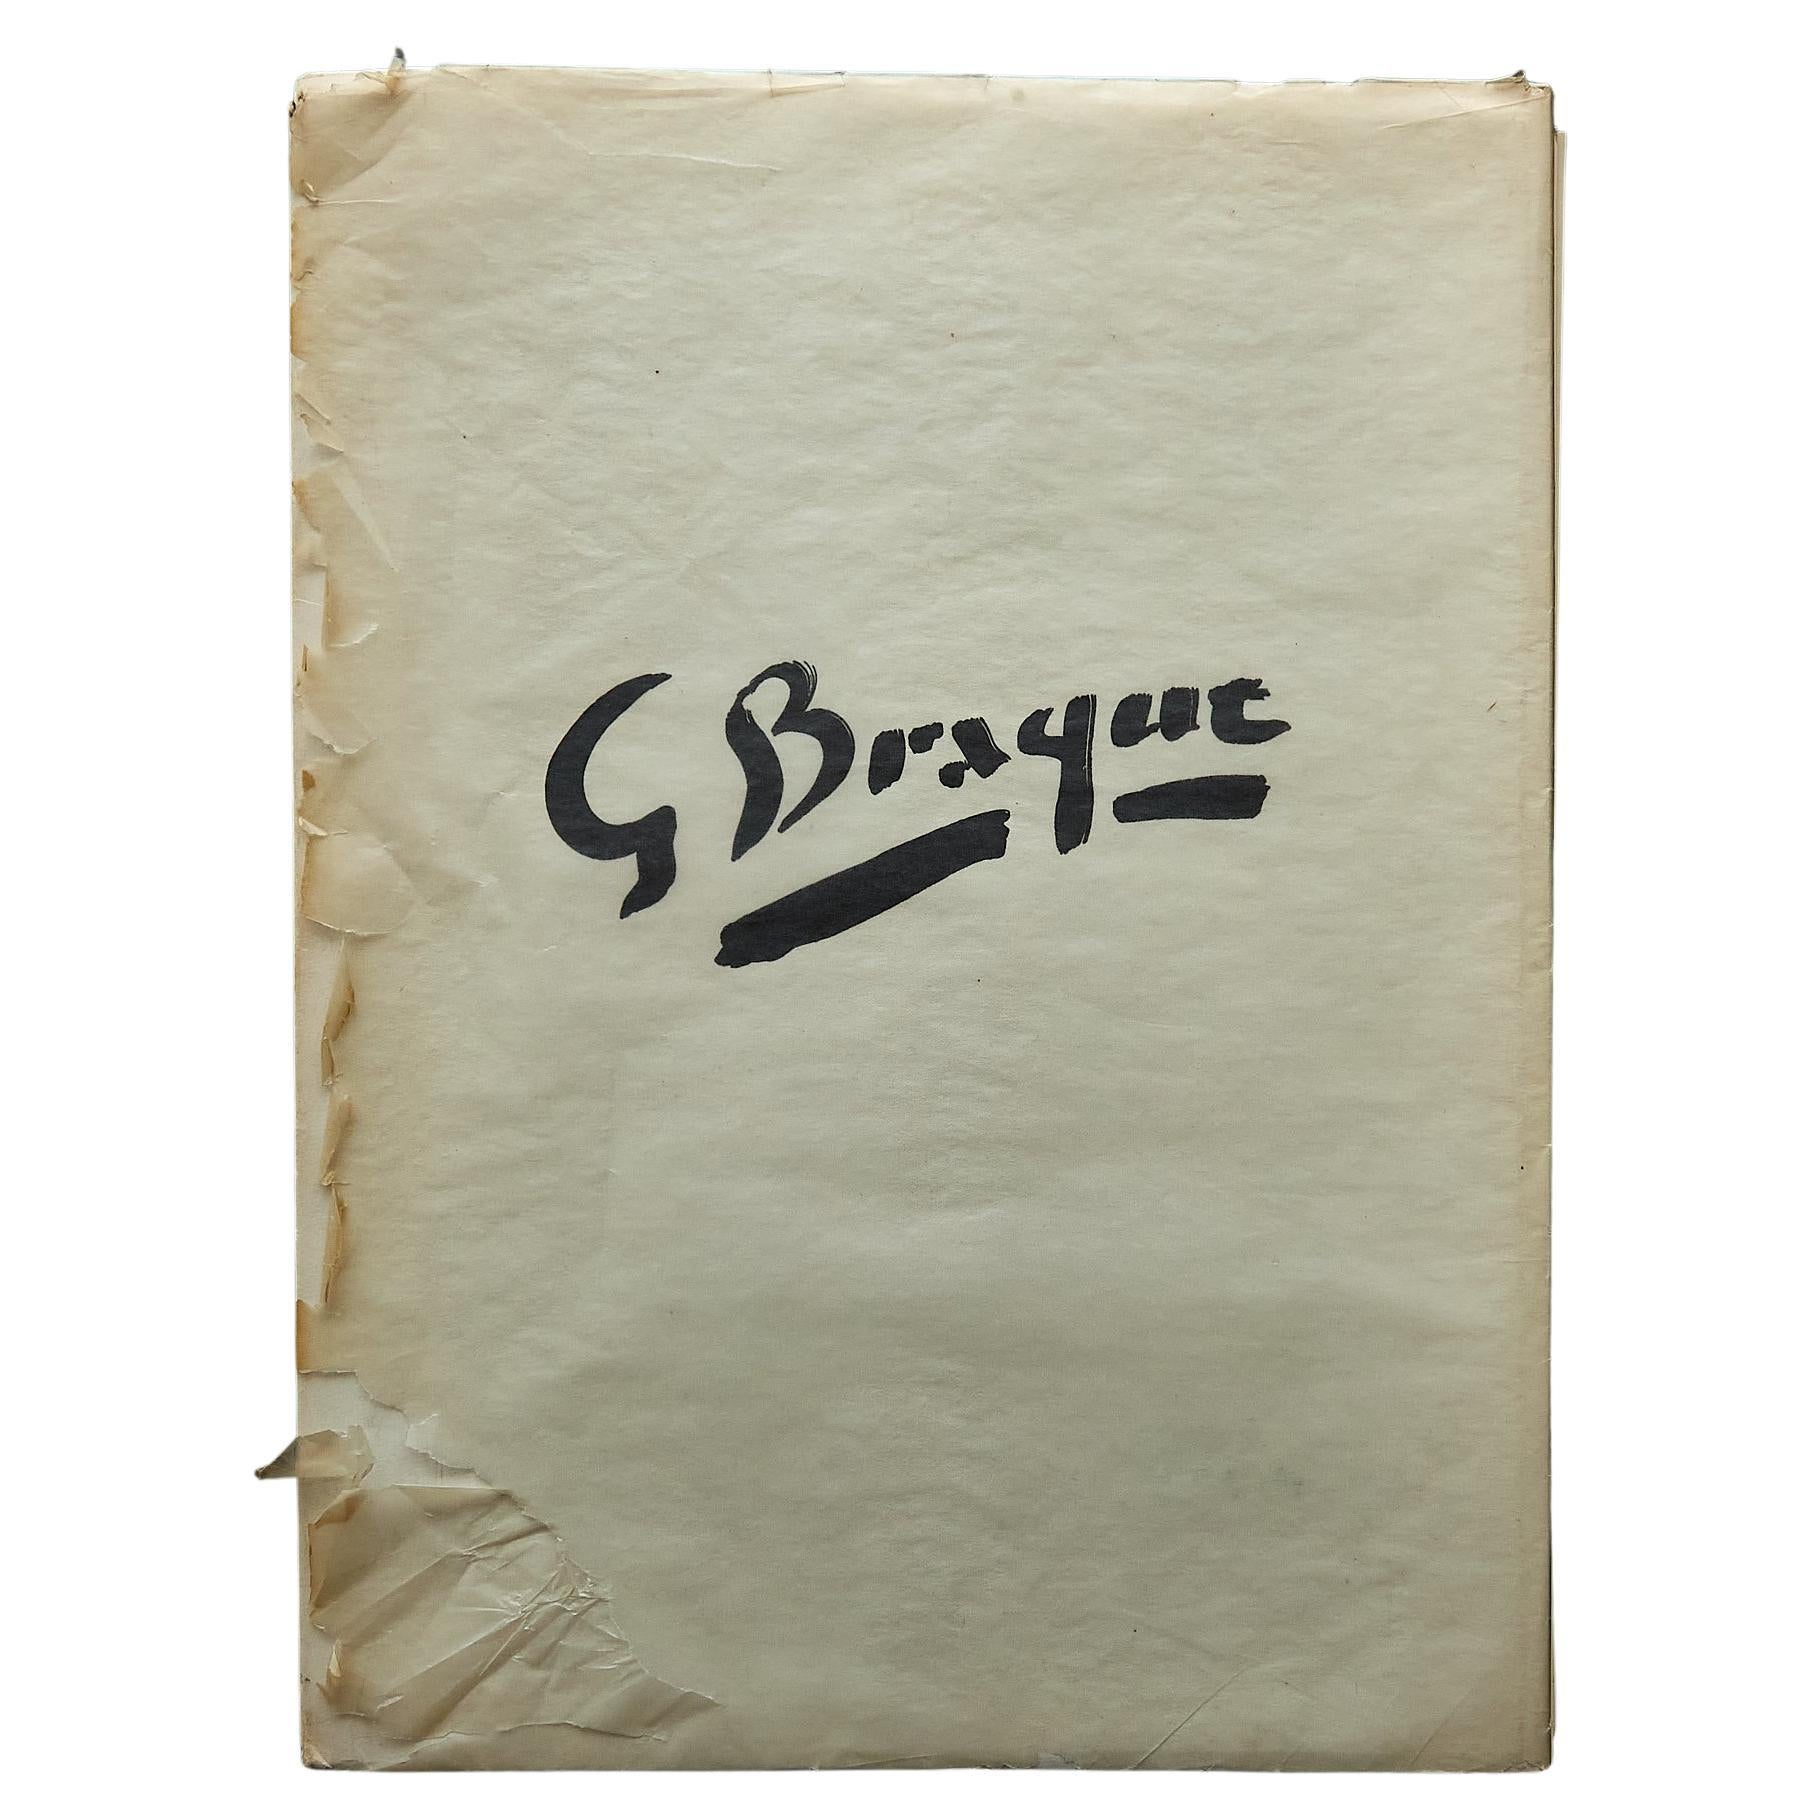 George Braque Book by Ing. C. Olivetti, 1958